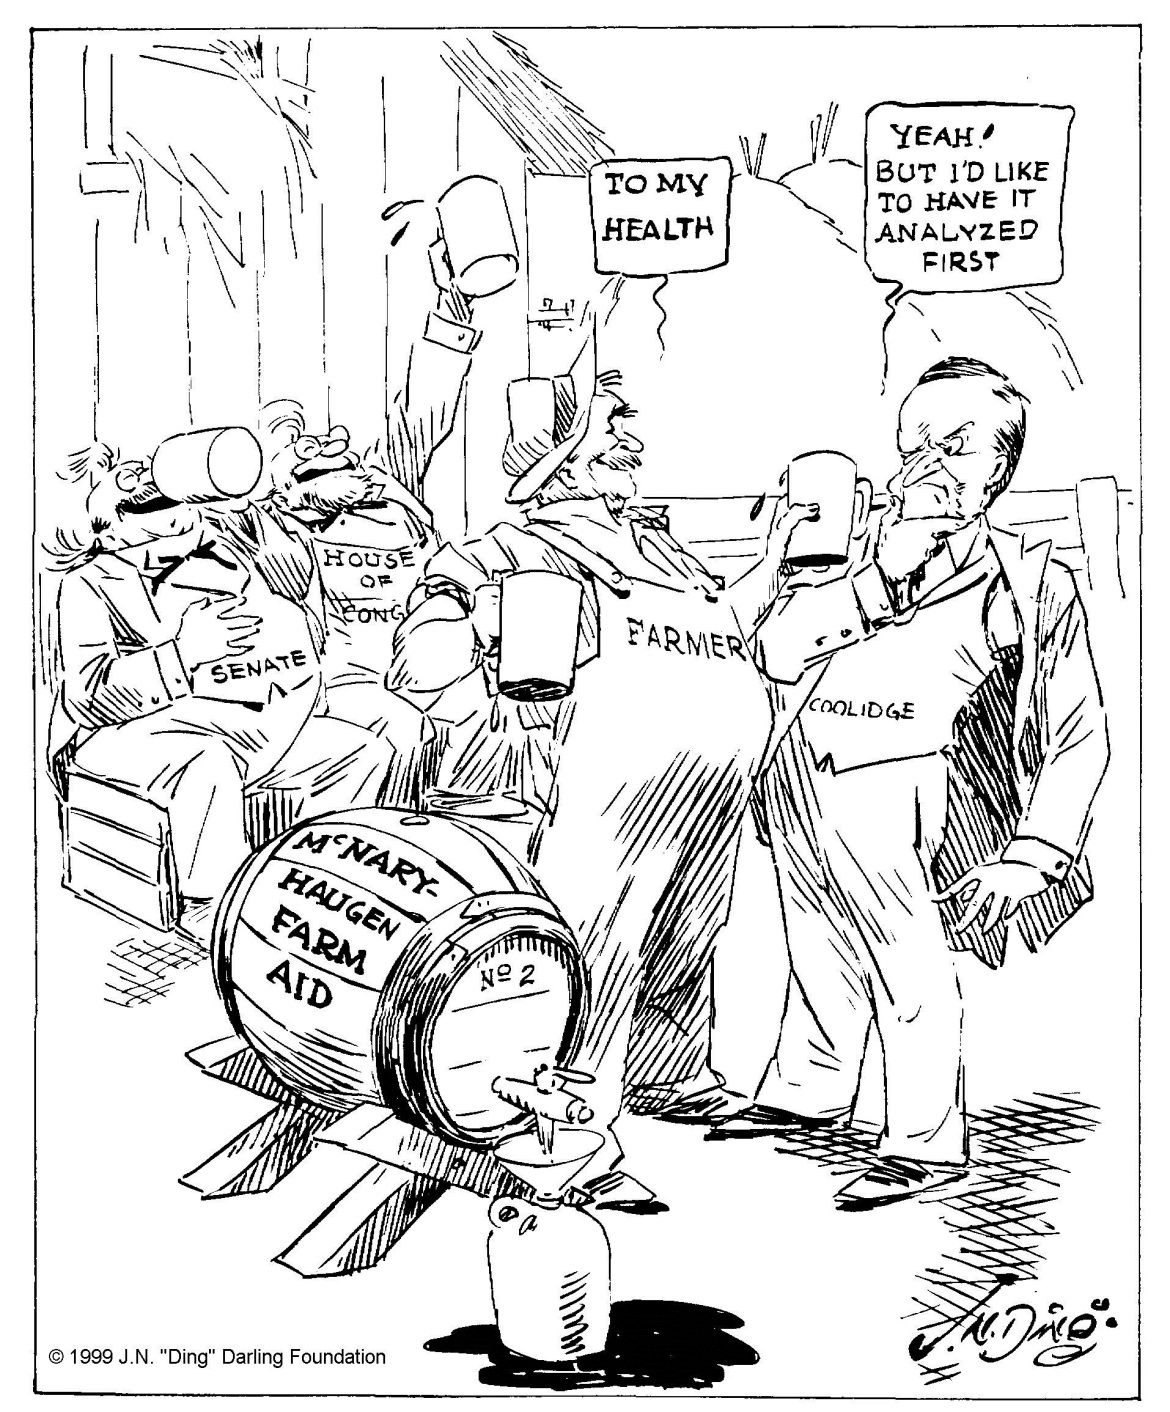 "Safety first," by "Ding" Darling, The Des Moines Register, April 10, 1928. Courtesy of the Ding Darling Foundation. 